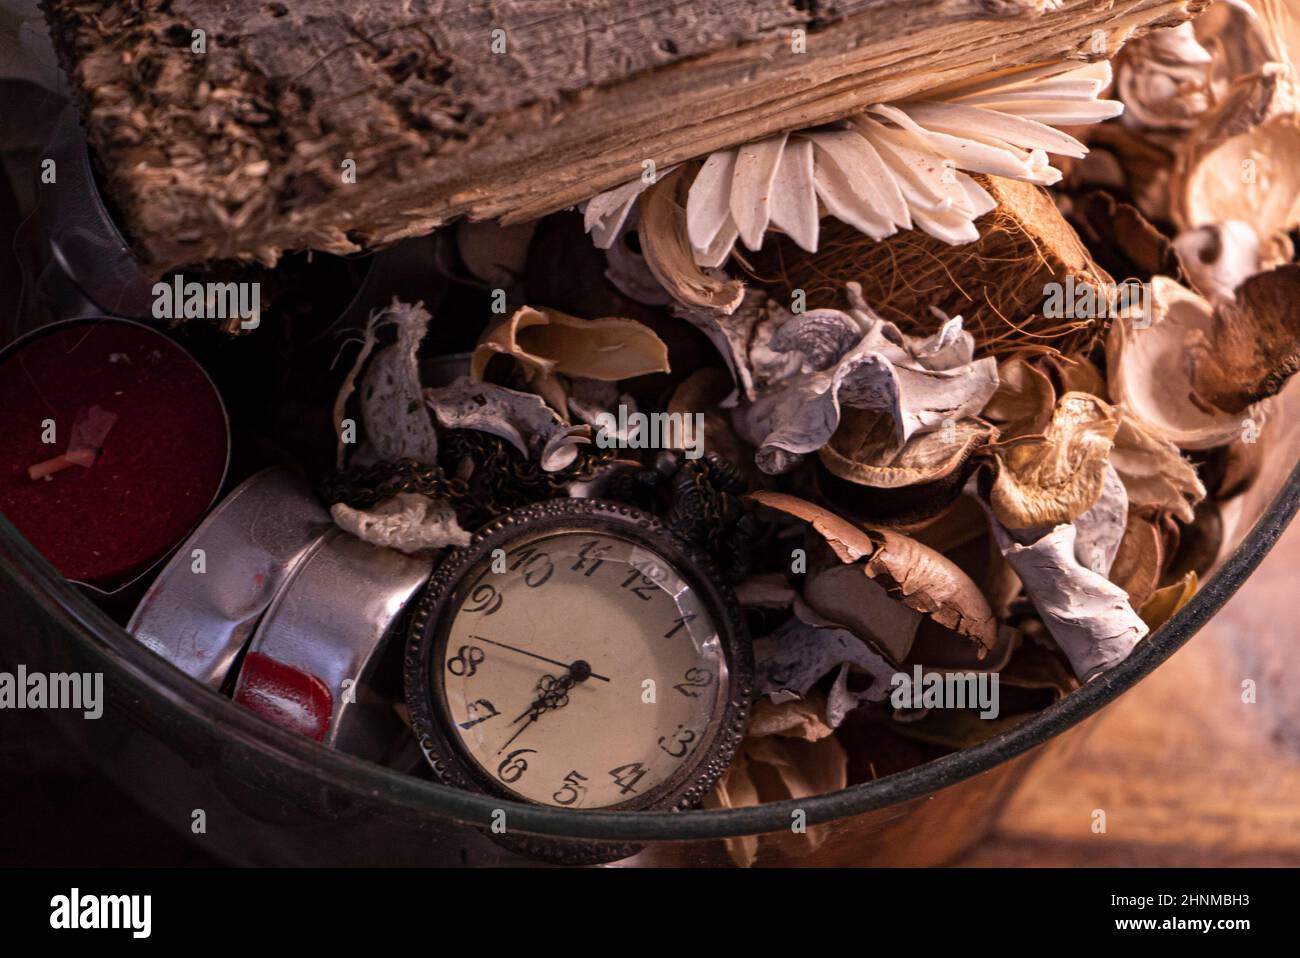 Pocket watch and other items Stock Photo